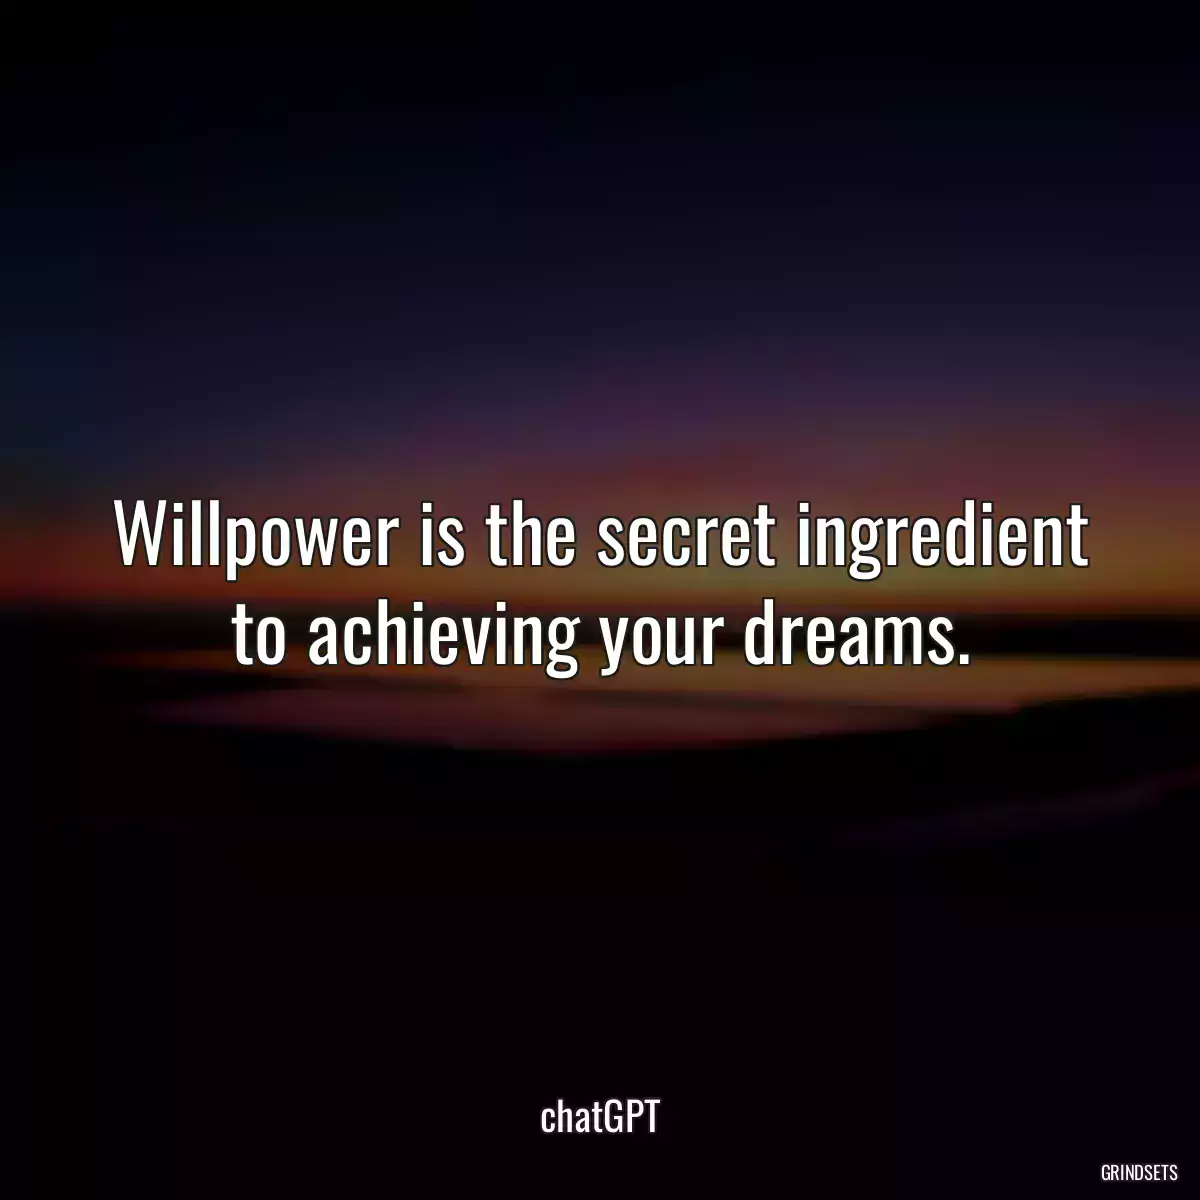 Willpower is the secret ingredient to achieving your dreams.